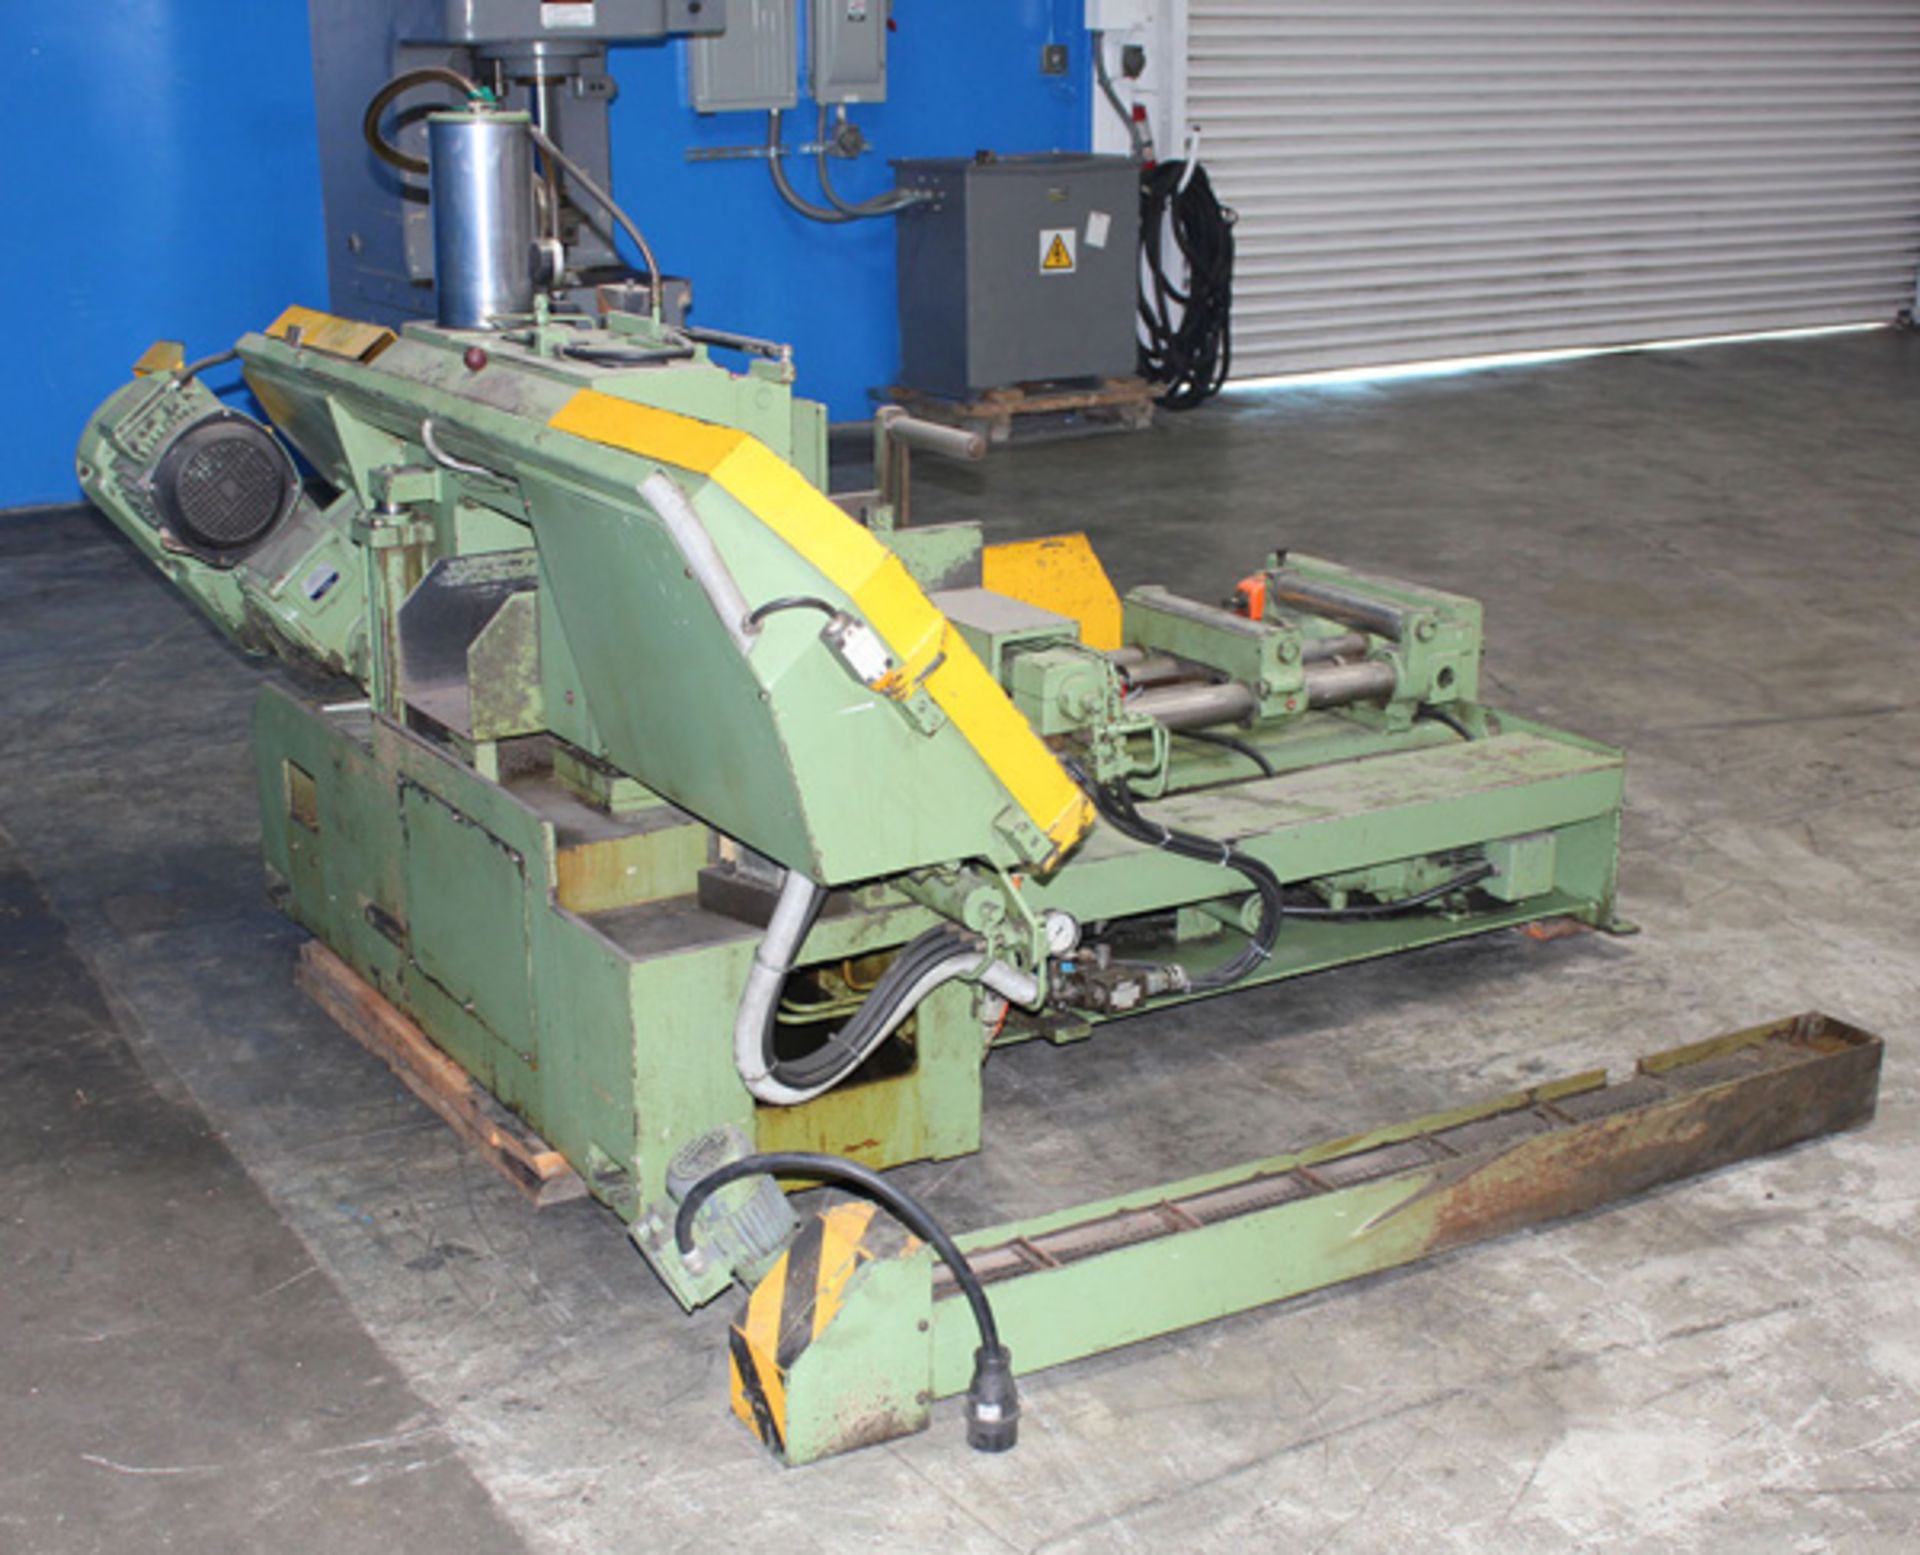 1988 Behringer Automatic Horizontal Band Saw, 11.8" x 10.2", Mdl: HBP260A, S/N: 288604, Located - Image 5 of 7